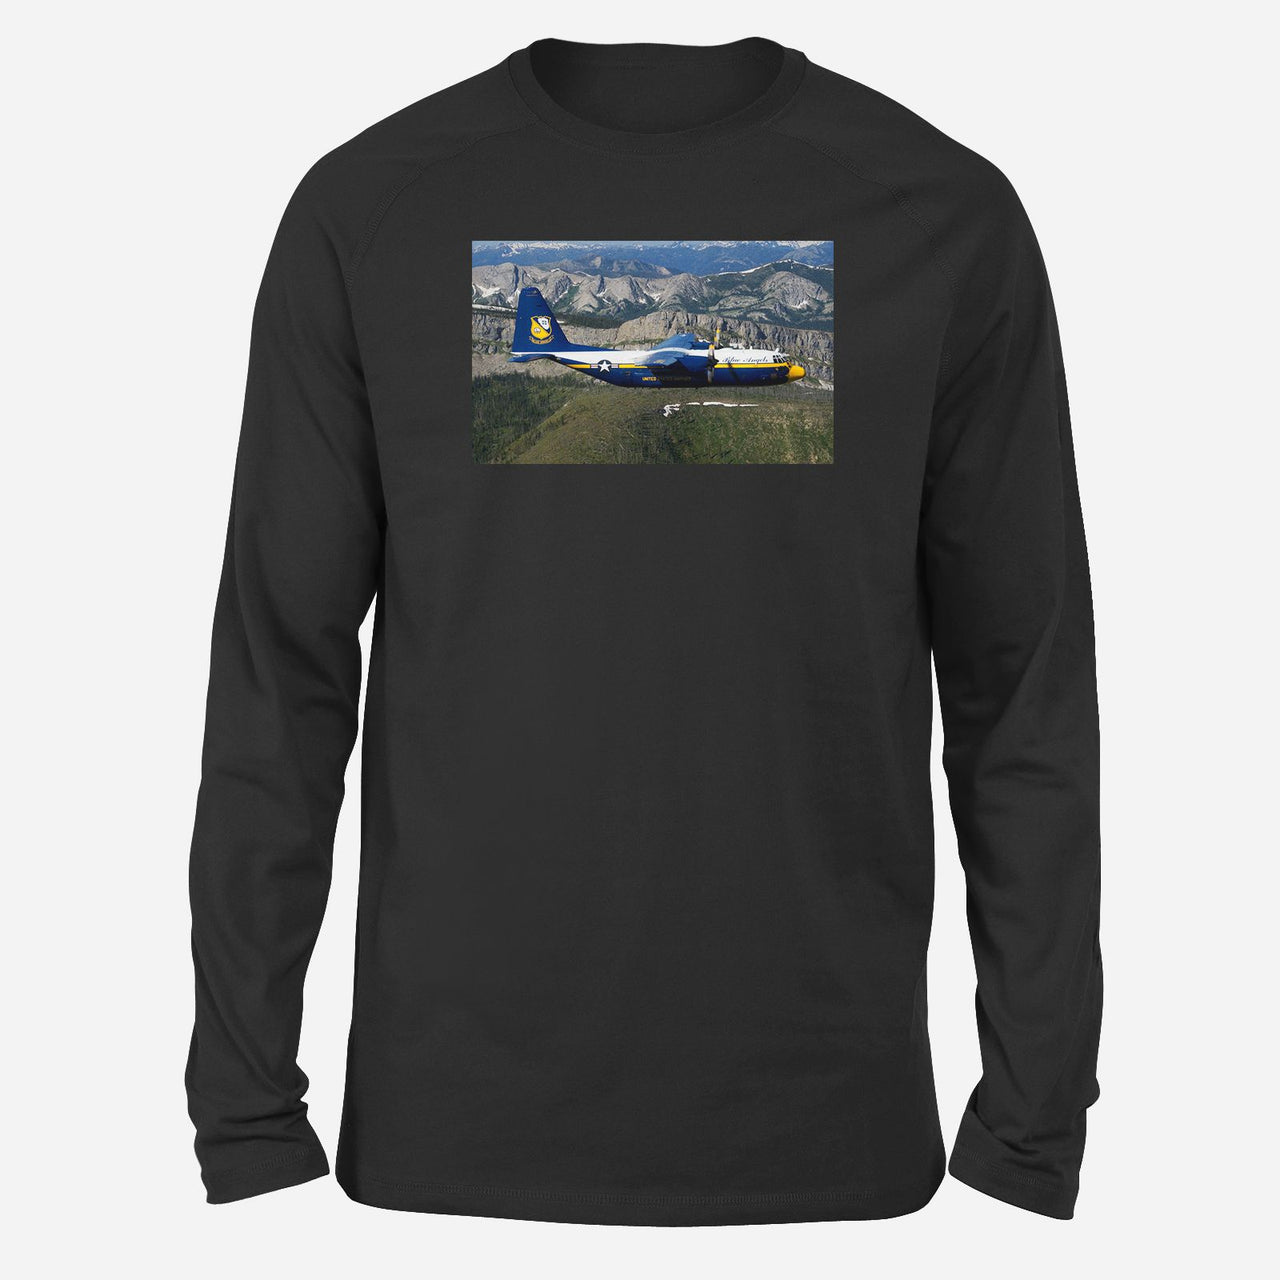 Amazing View with Blue Angels Aircraft Designed Long-Sleeve T-Shirts